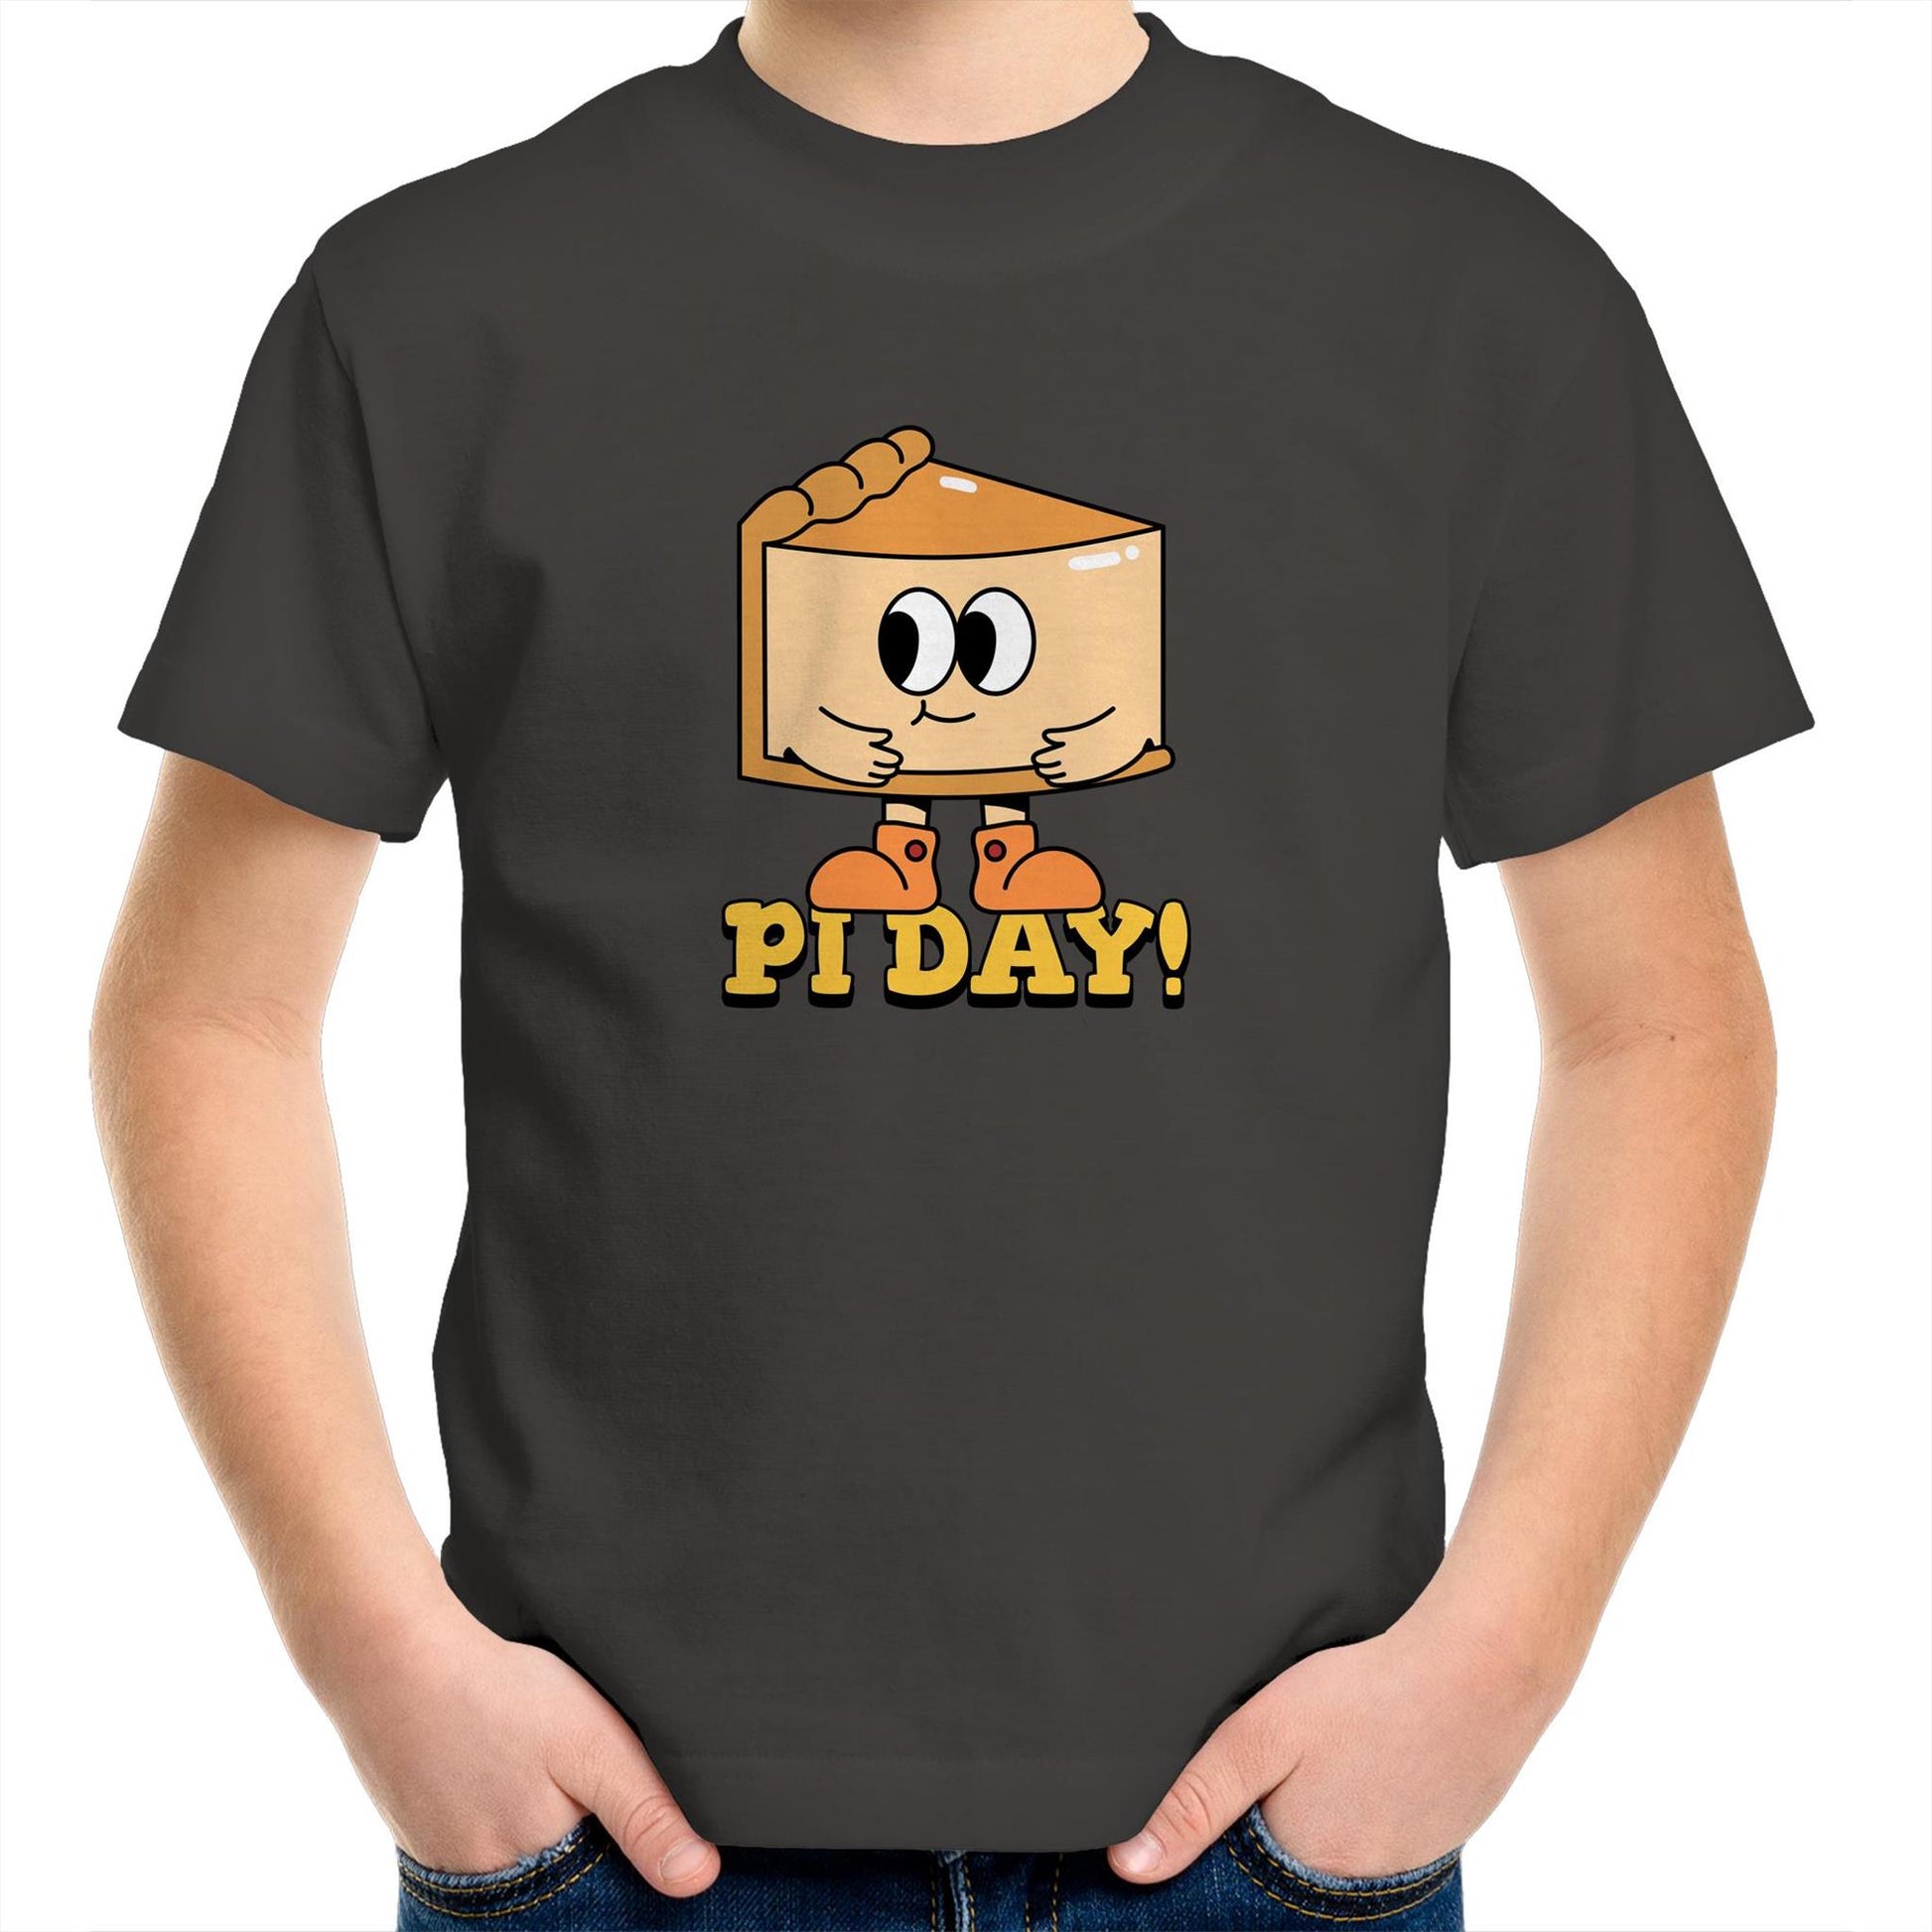 Pi Day - Kids Youth Crew T-Shirt Charcoal Kids Youth T-shirt Maths Science